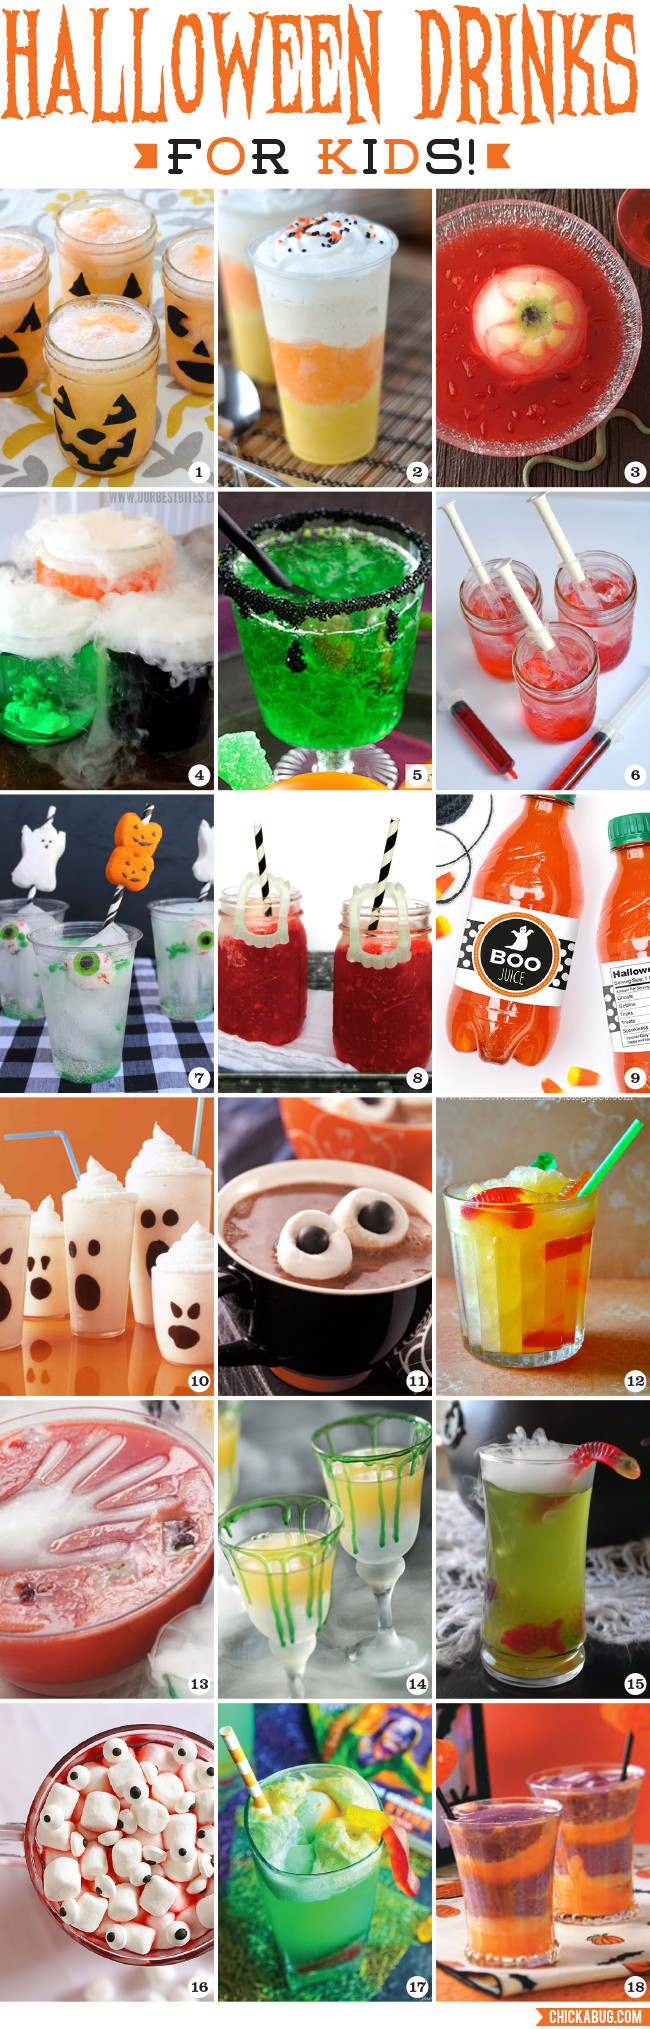 Drink Ideas For Kids Halloween Party
 Halloween Drinks for Kids